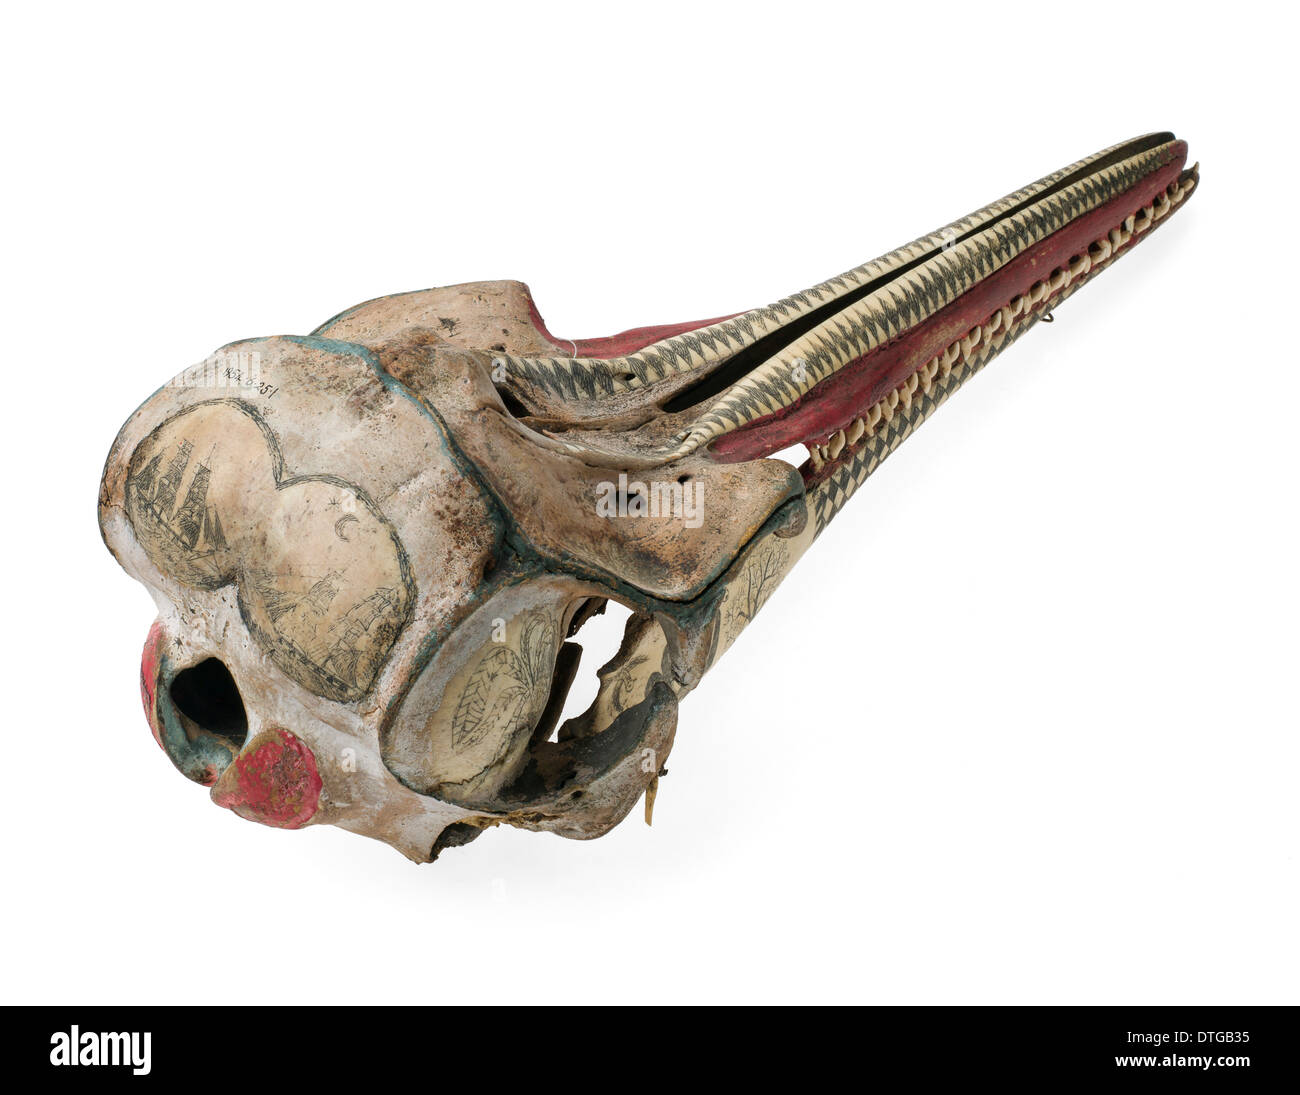 Rough-toothed dolphin skull with ink scrimshaw decoration Stock Photo